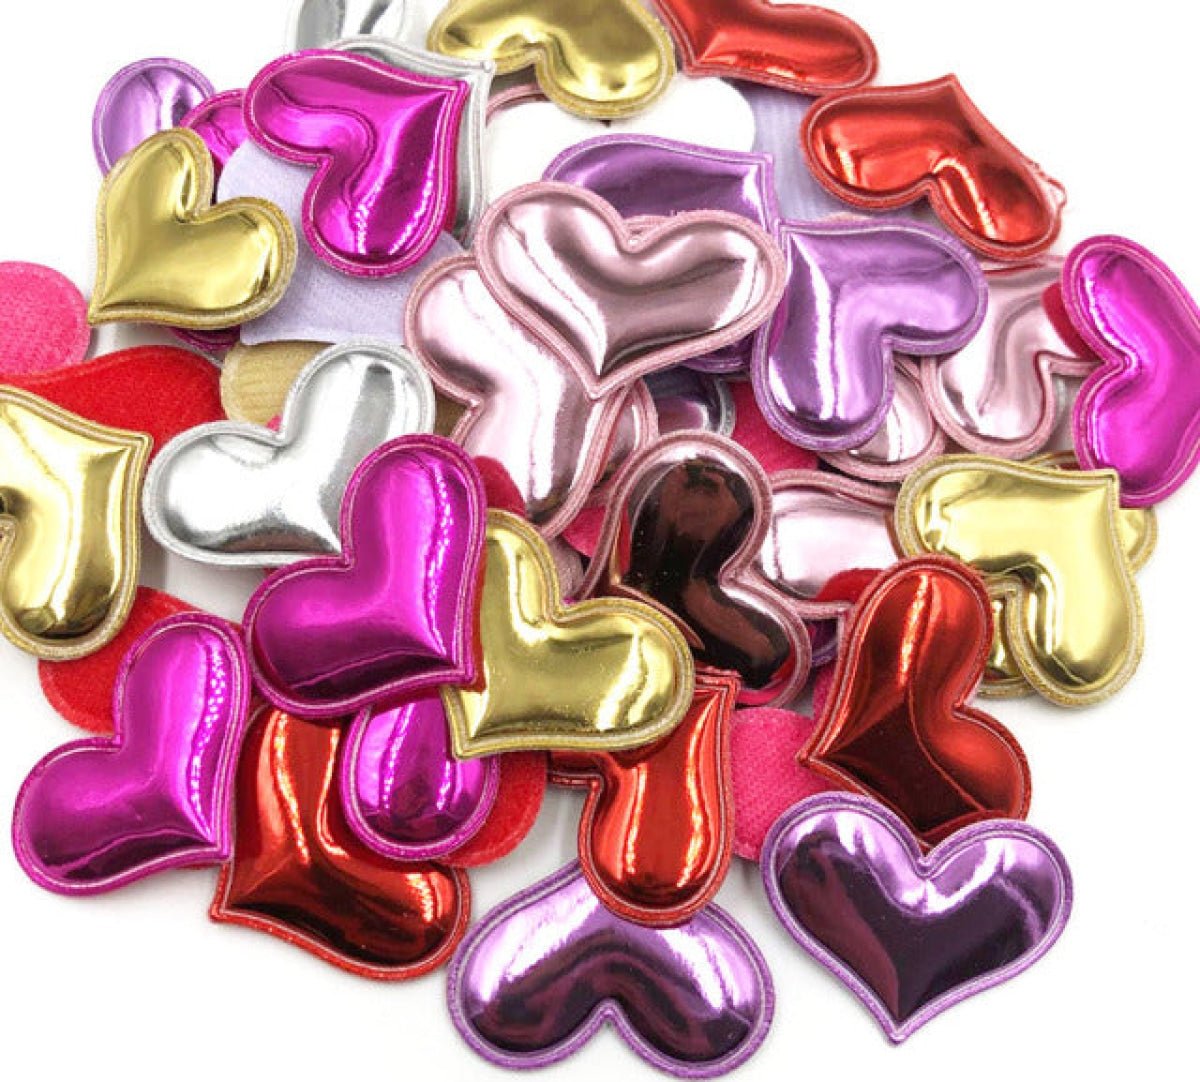 100pcs Glossy Shiny Padded Patches Heart Shape Garment Appliques For Decoration DIY Accessories Toy Craft Clothing PU Leather - Mixed Colours - - Asia Sell